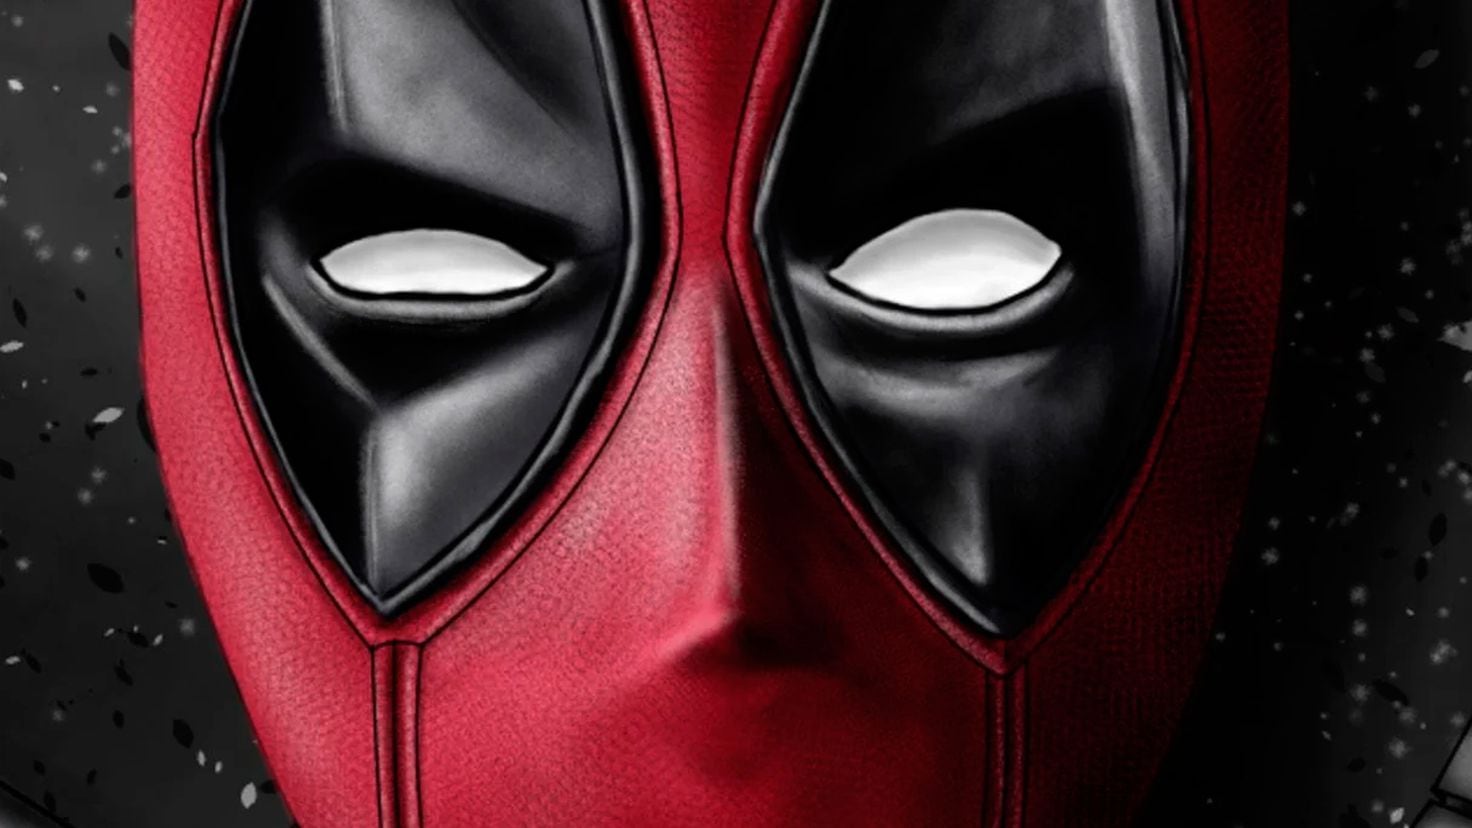 Deadpool 3, a 'Very Much R-rated' movie, halted mid-shoot by strike -  Meristation